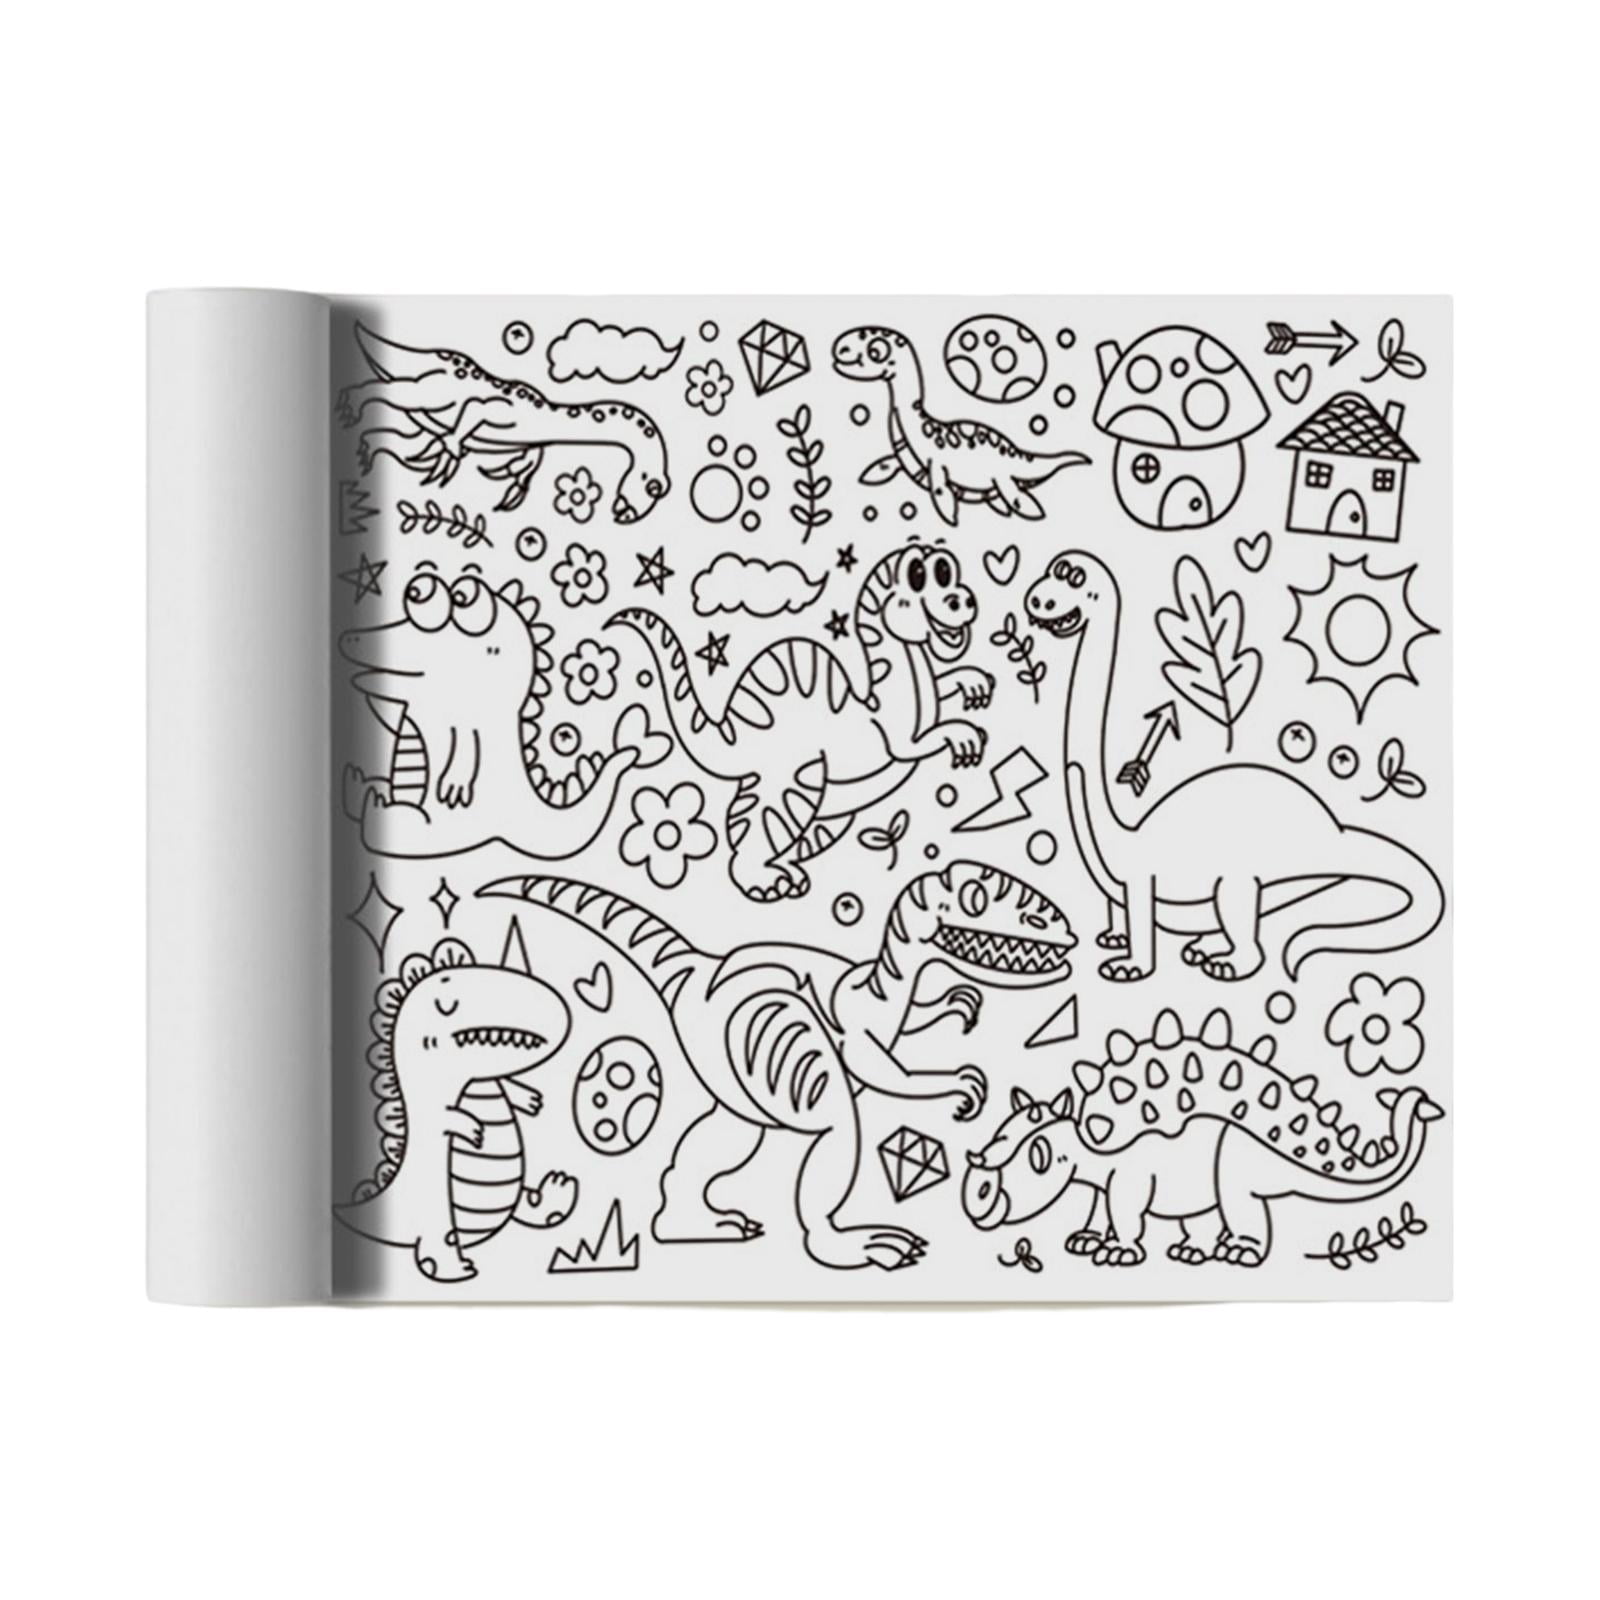 Coloring Roll Kit - Dino World - 6920773330675